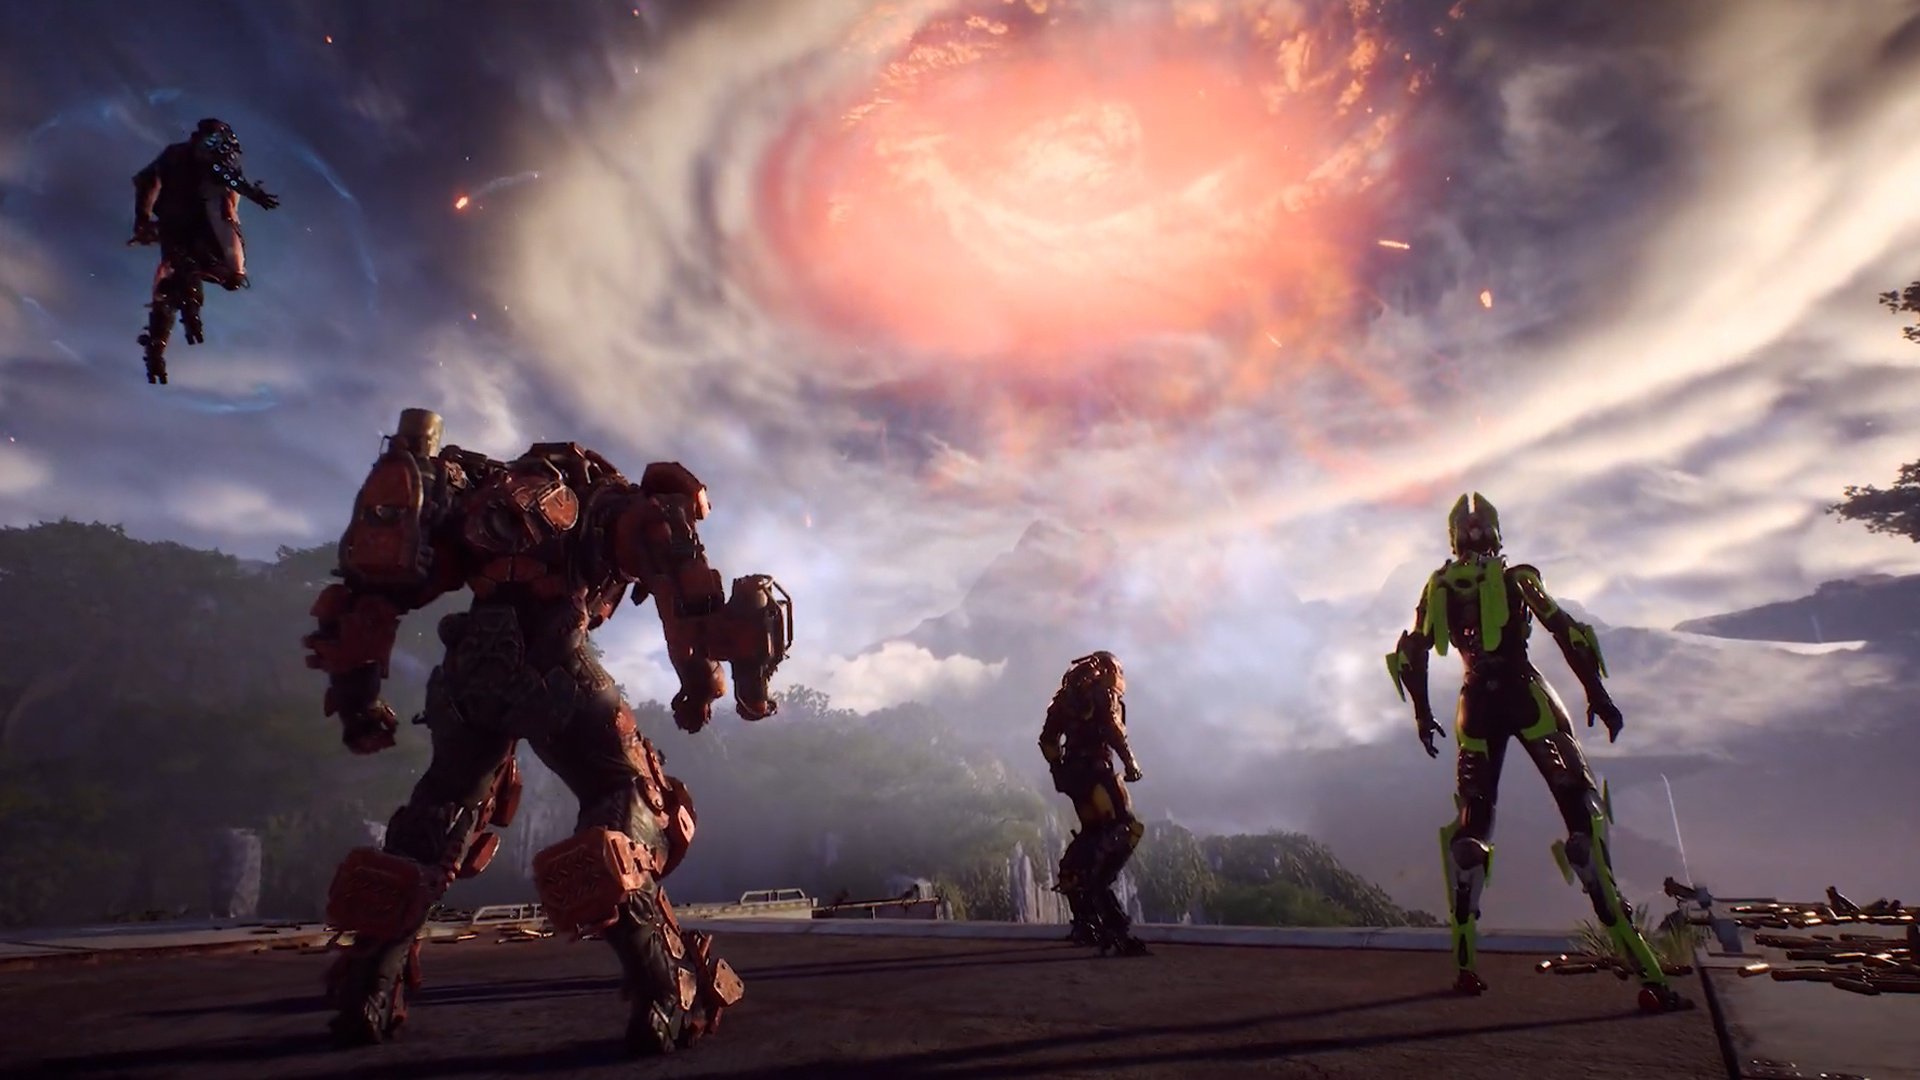 ANTHEM 1.3 PS4 Patch Finally Adds Cataclysm Event, But Nobody Seems to